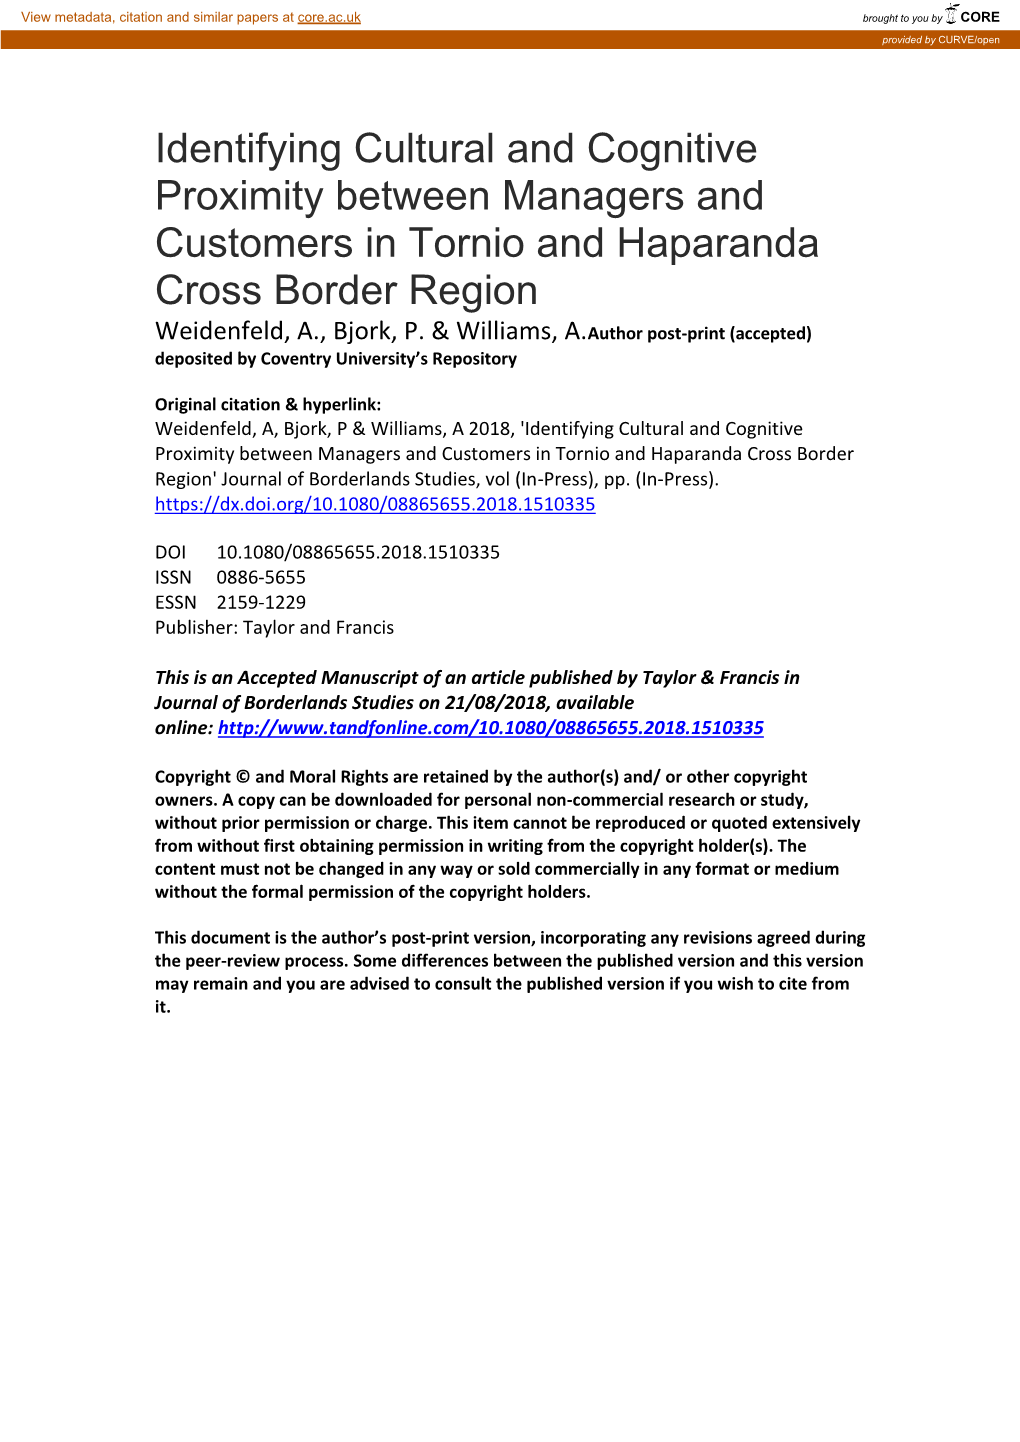 Identifying Cultural and Cognitive Proximity Between Managers and Customers in Tornio and Haparanda Cross Border Region Weidenfeld, A., Bjork, P